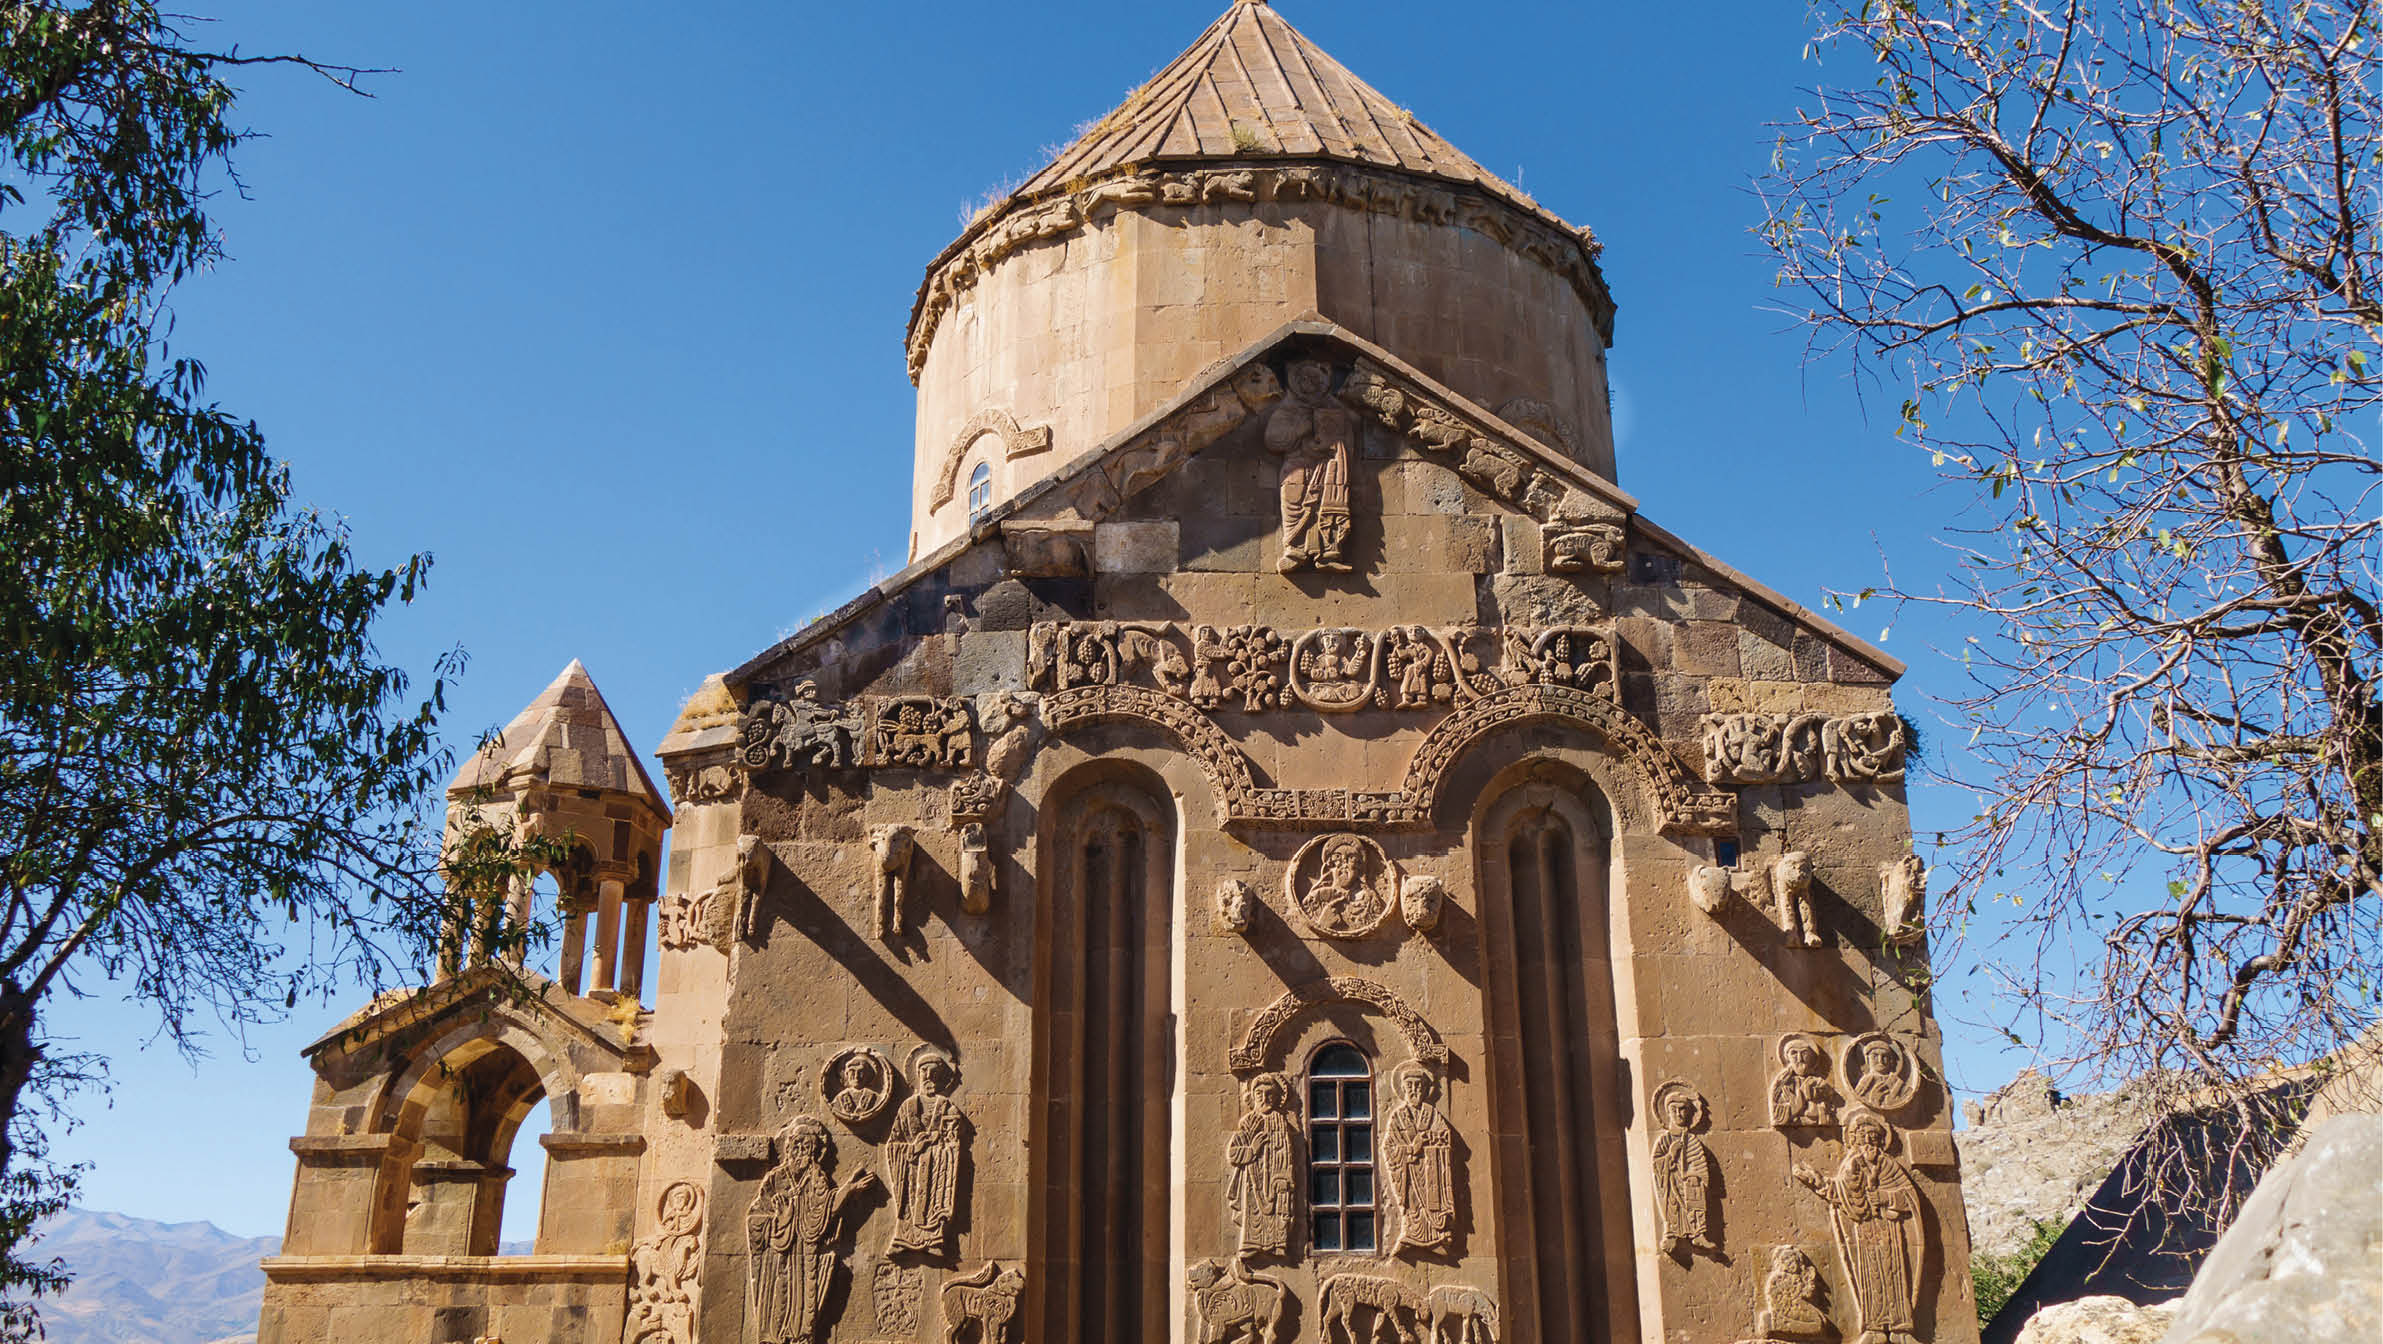 Eastern side of medieval Armenian Cathedral of Holy Cross & its bas-reliefs, Akdamar island, Van Lake, Gevaş Turkey  Church is richly decorated by bas-reliefs  It was built in 921 as church for king